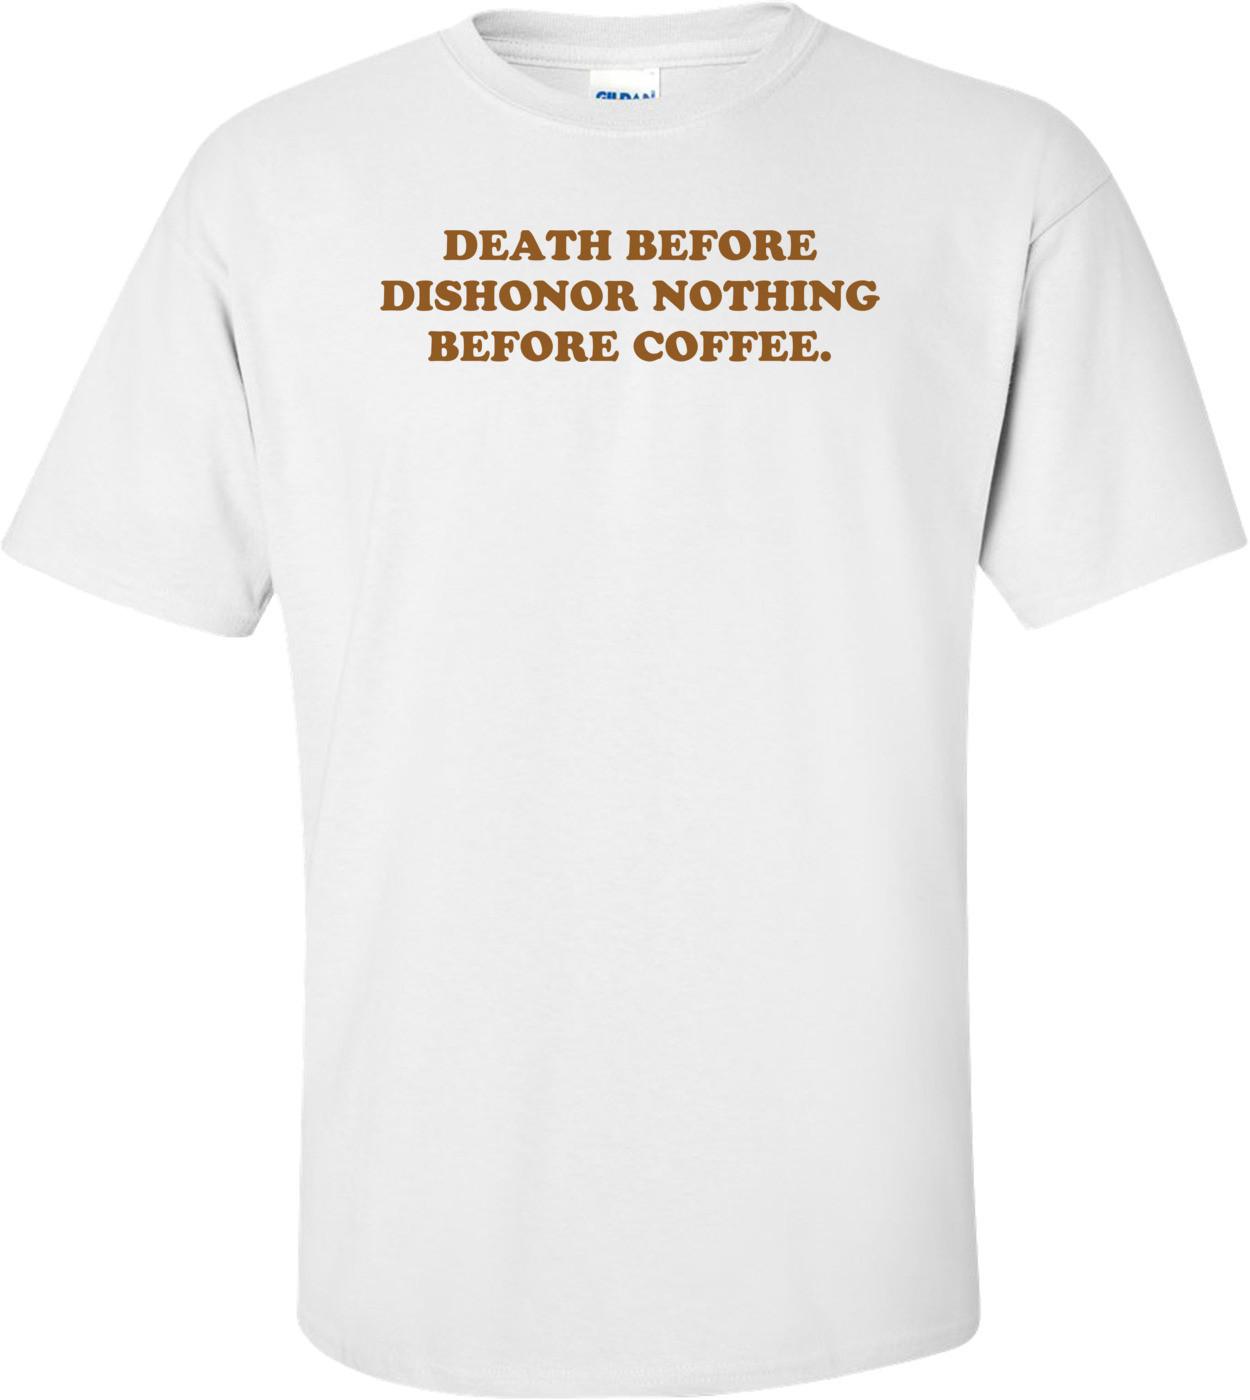 DEATH BEFORE DISHONOR NOTHING BEFORE COFFEE. Shirt